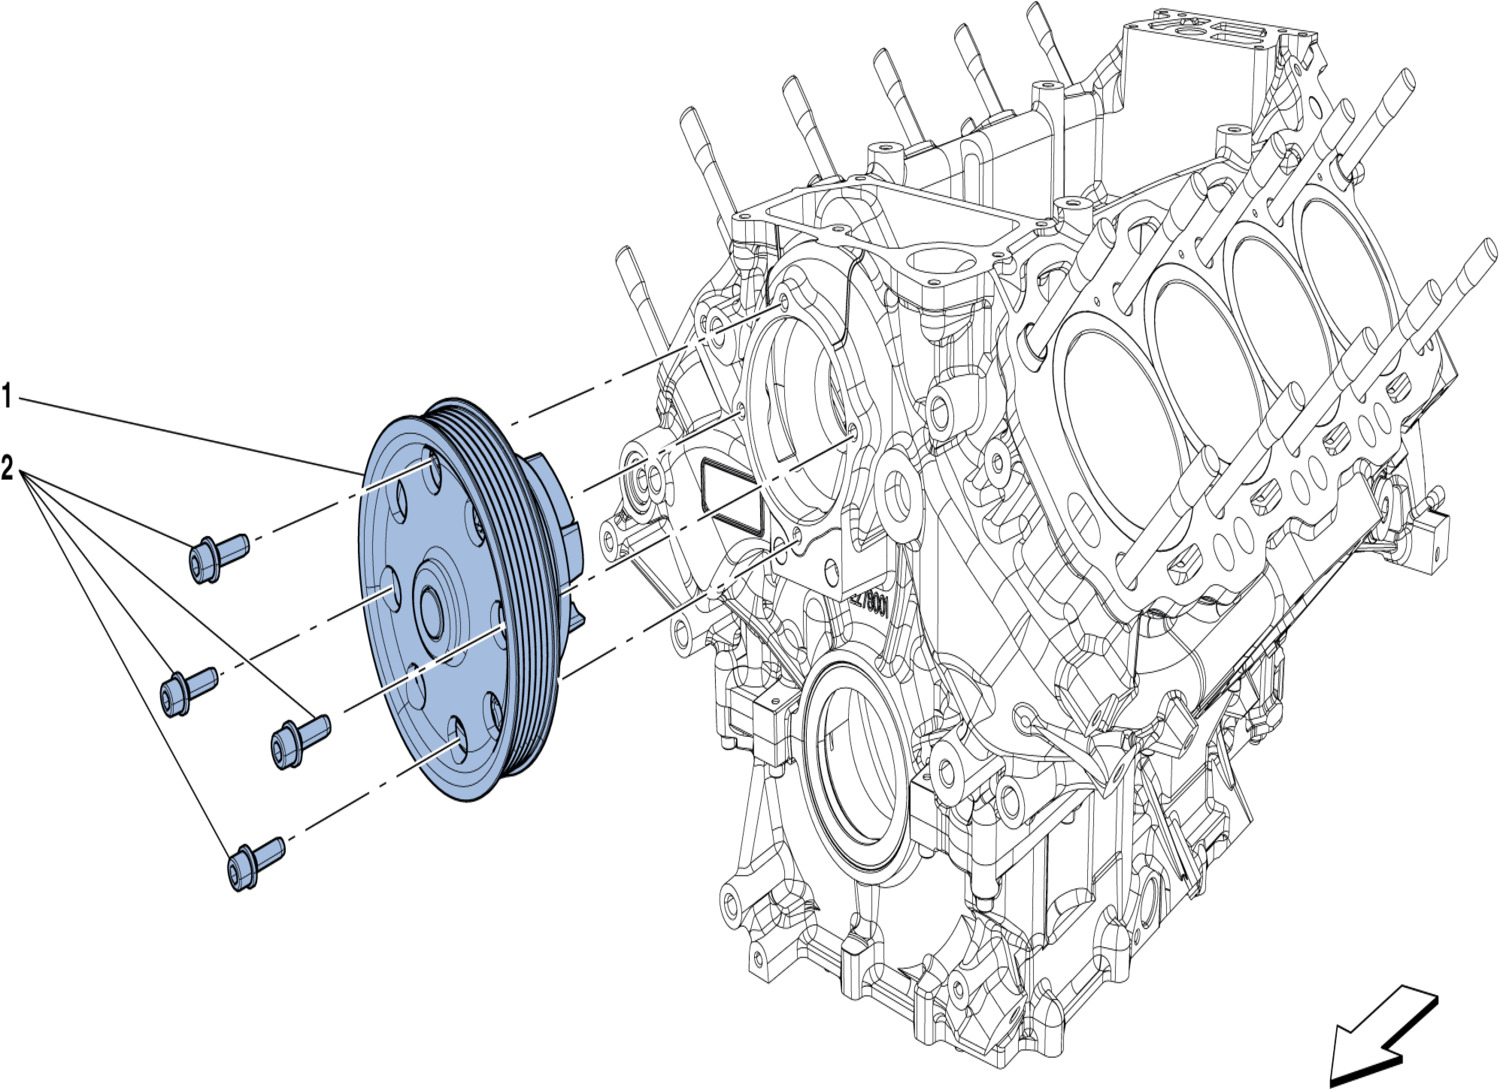 Schematic: Cooling: Water Pump, Header Tank And Pipes